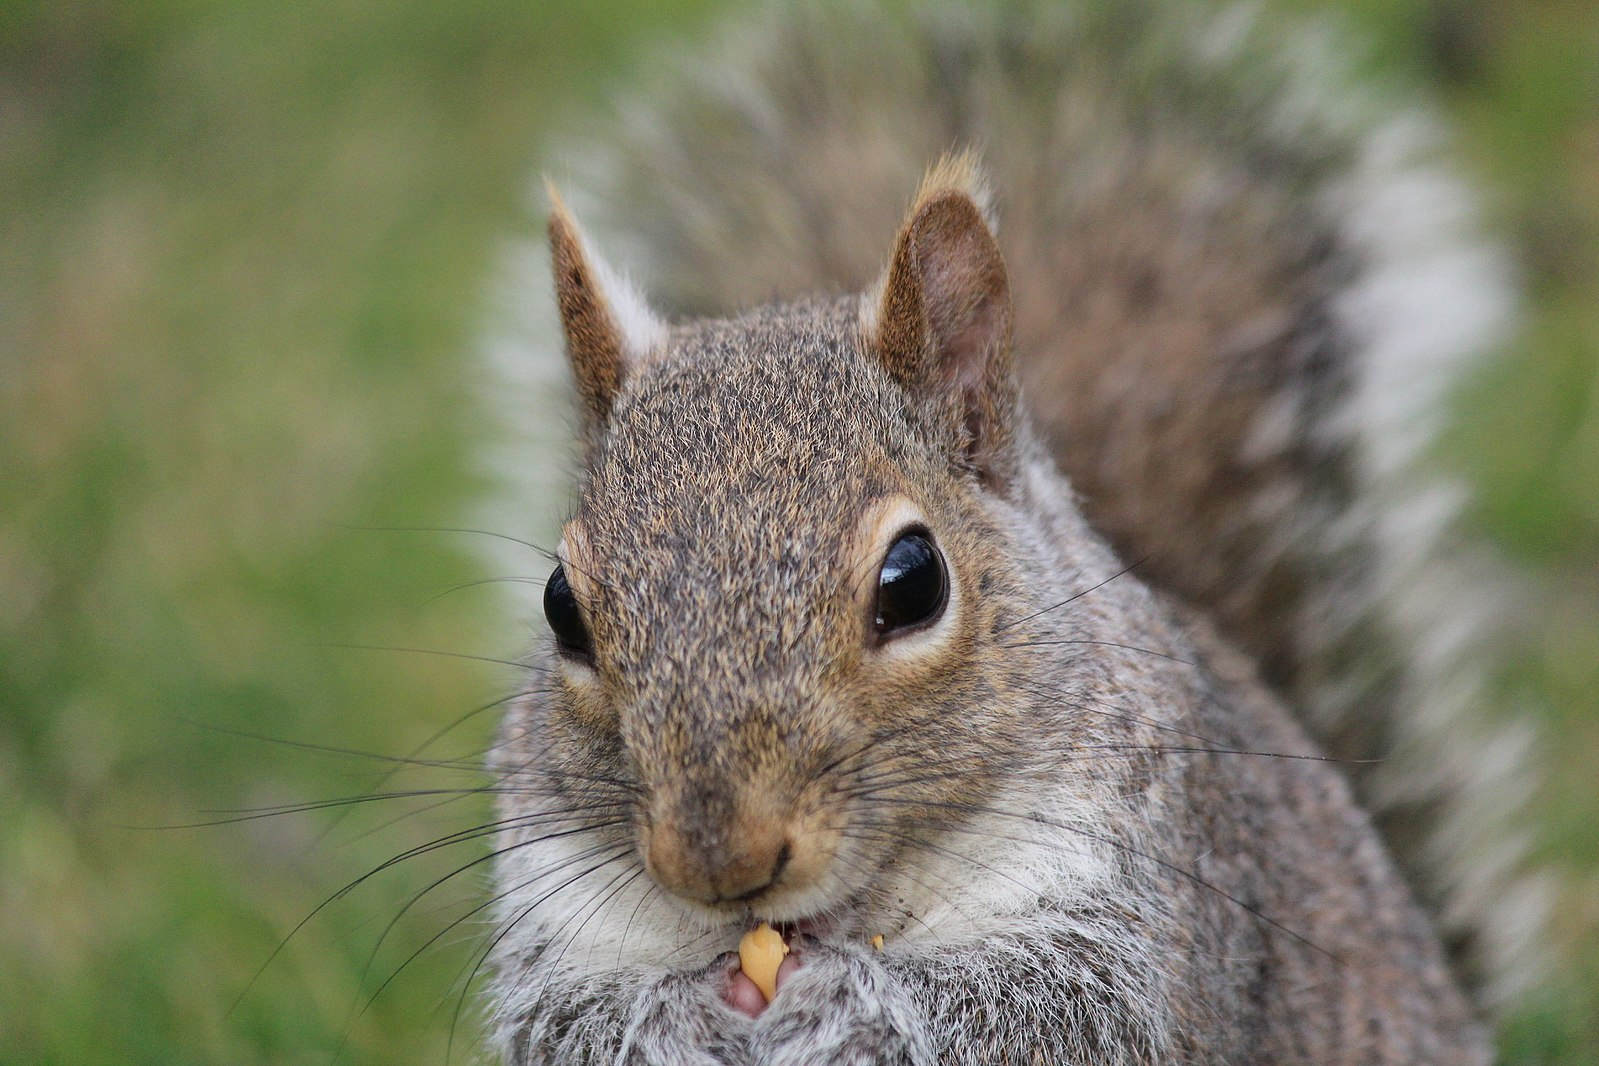 Meet the Eastern gray squirrel